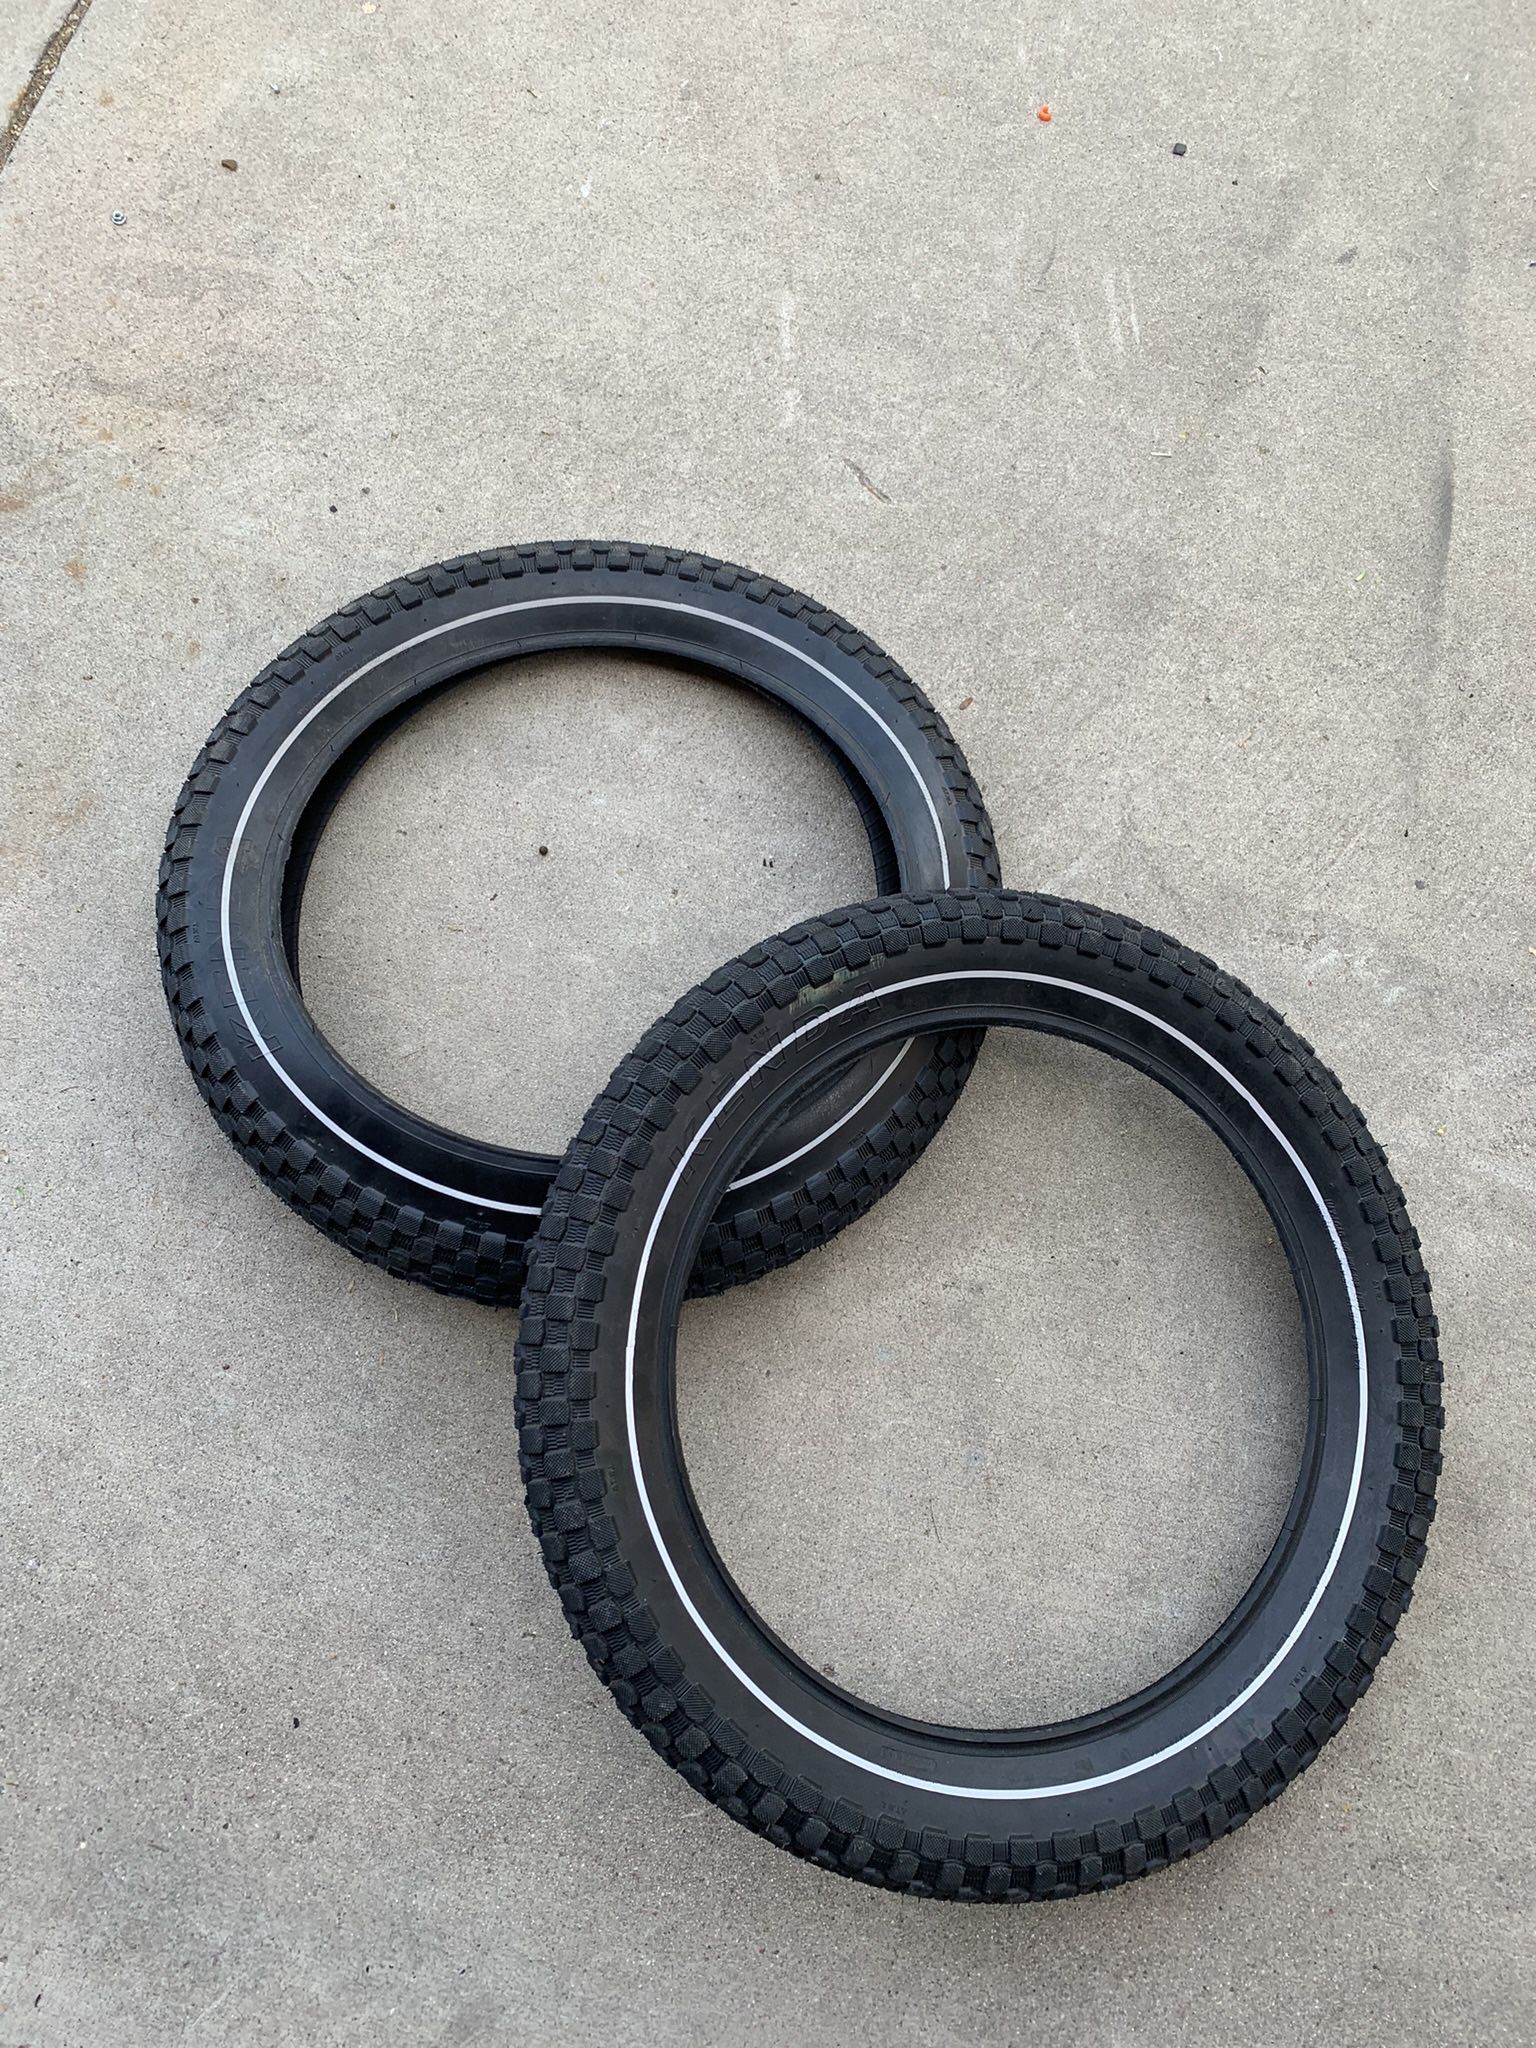 20x 3.30 Tires Electric Bike Tires